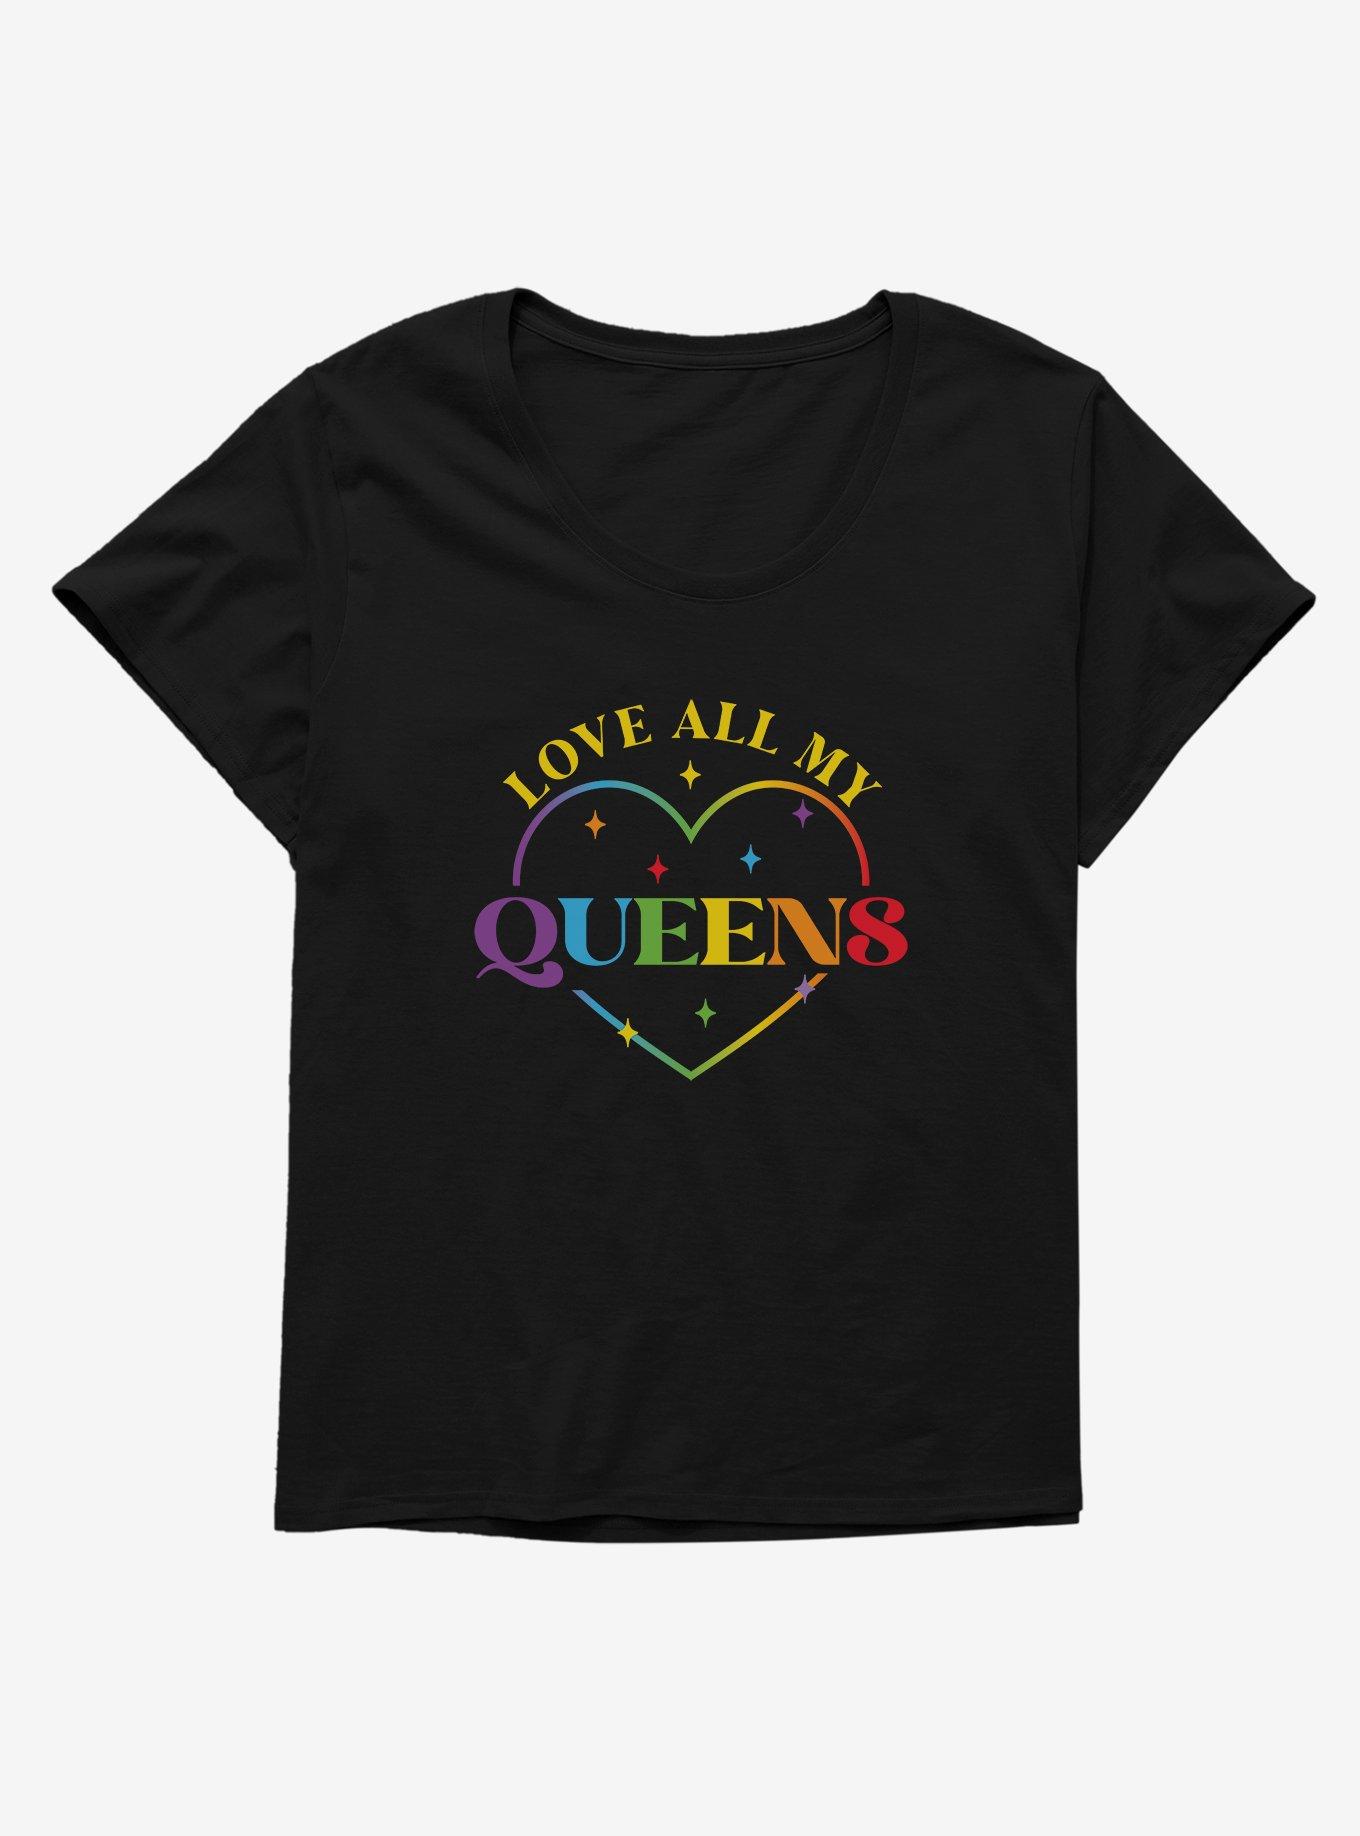 Pride Love All My Queens Heart Girls T-Shirt Plus Size, BLACK, hi-res